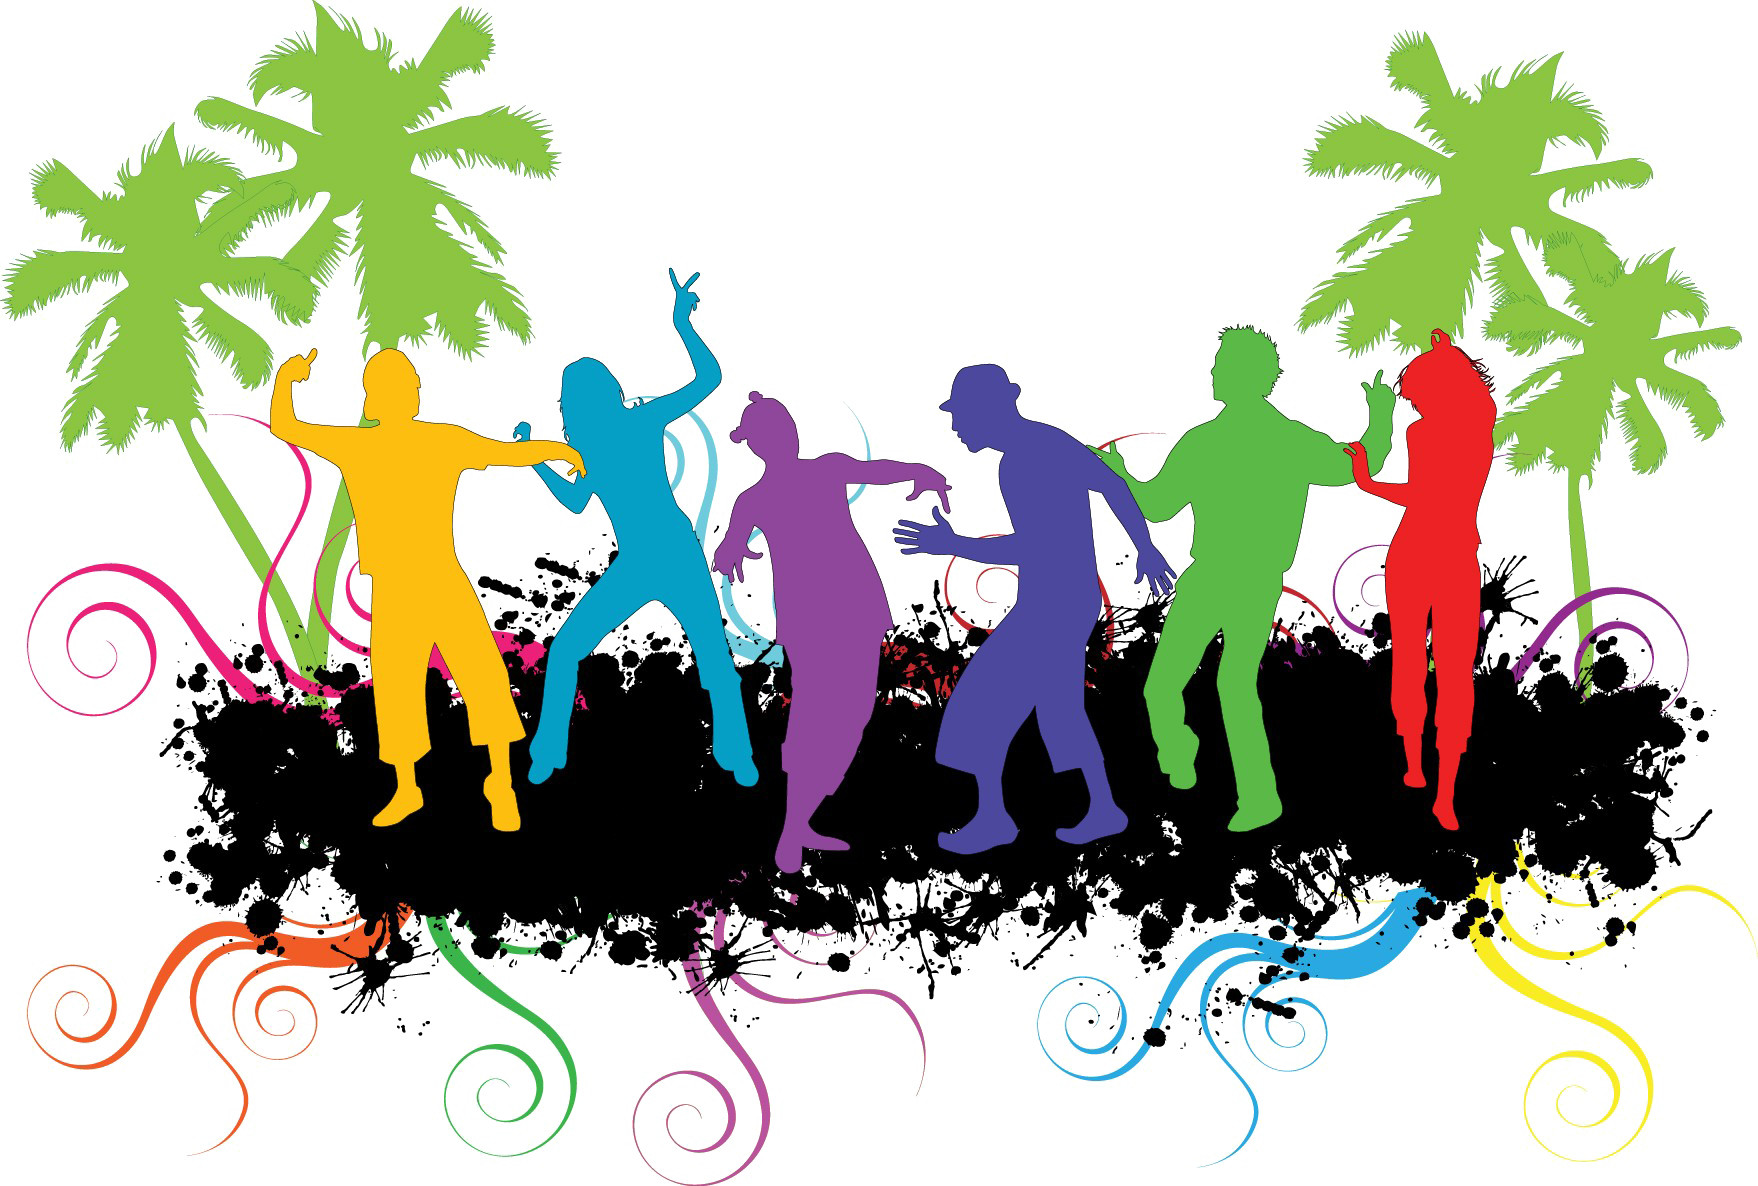 Abstract People Image PNG Image High Quality PNG Image